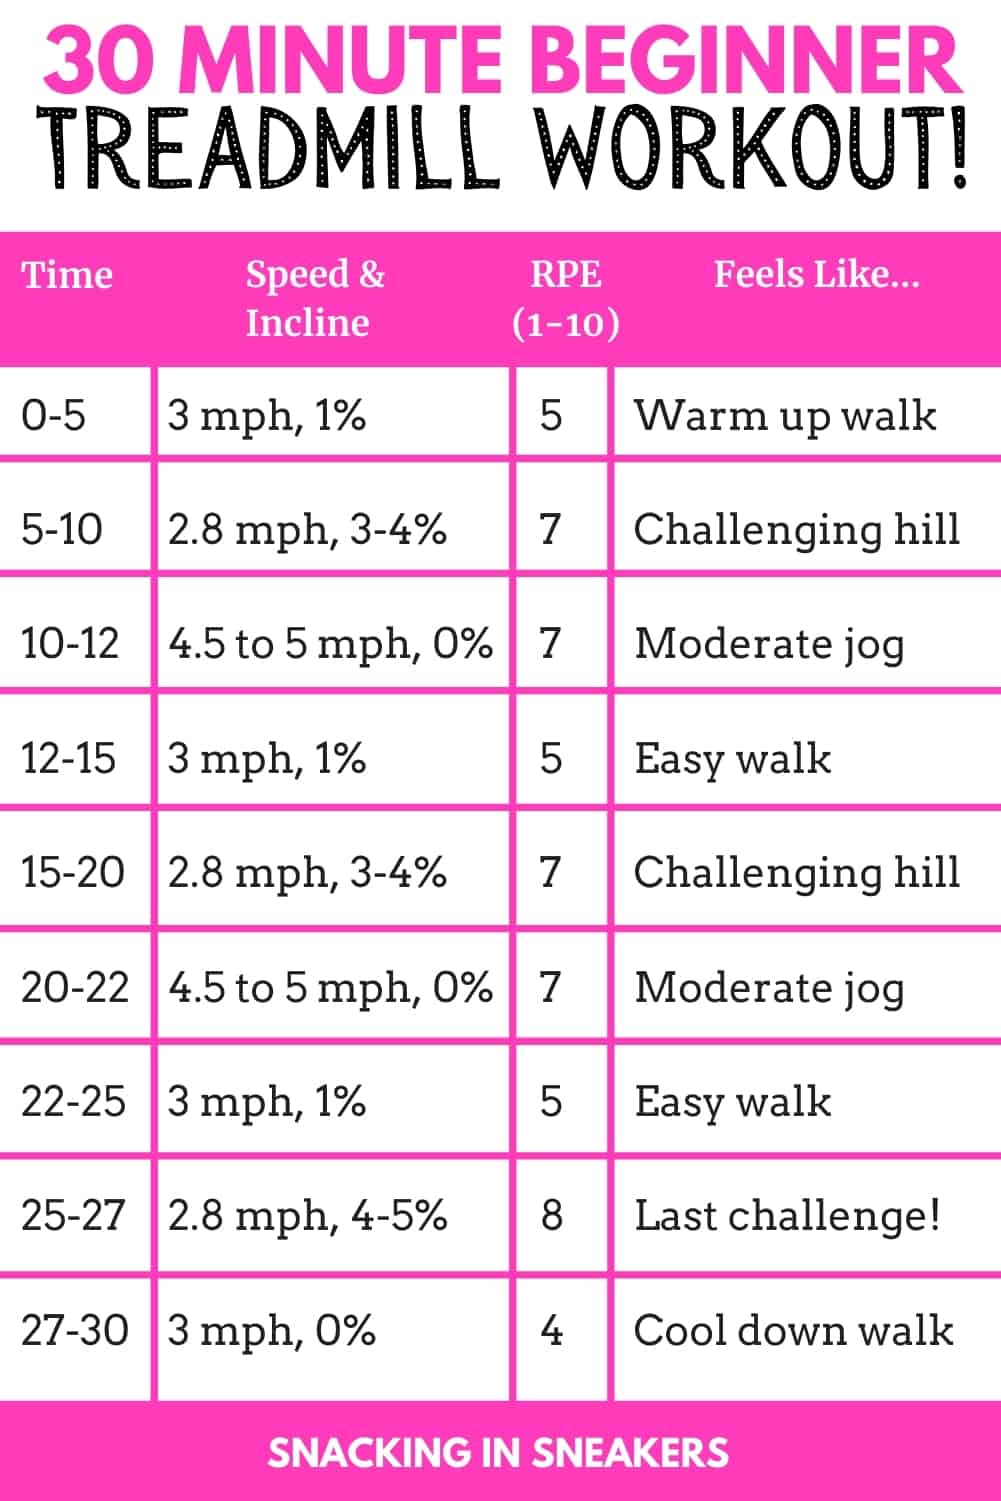 30 Minute Beginner Treadmill Workout - Snacking in Sneakers